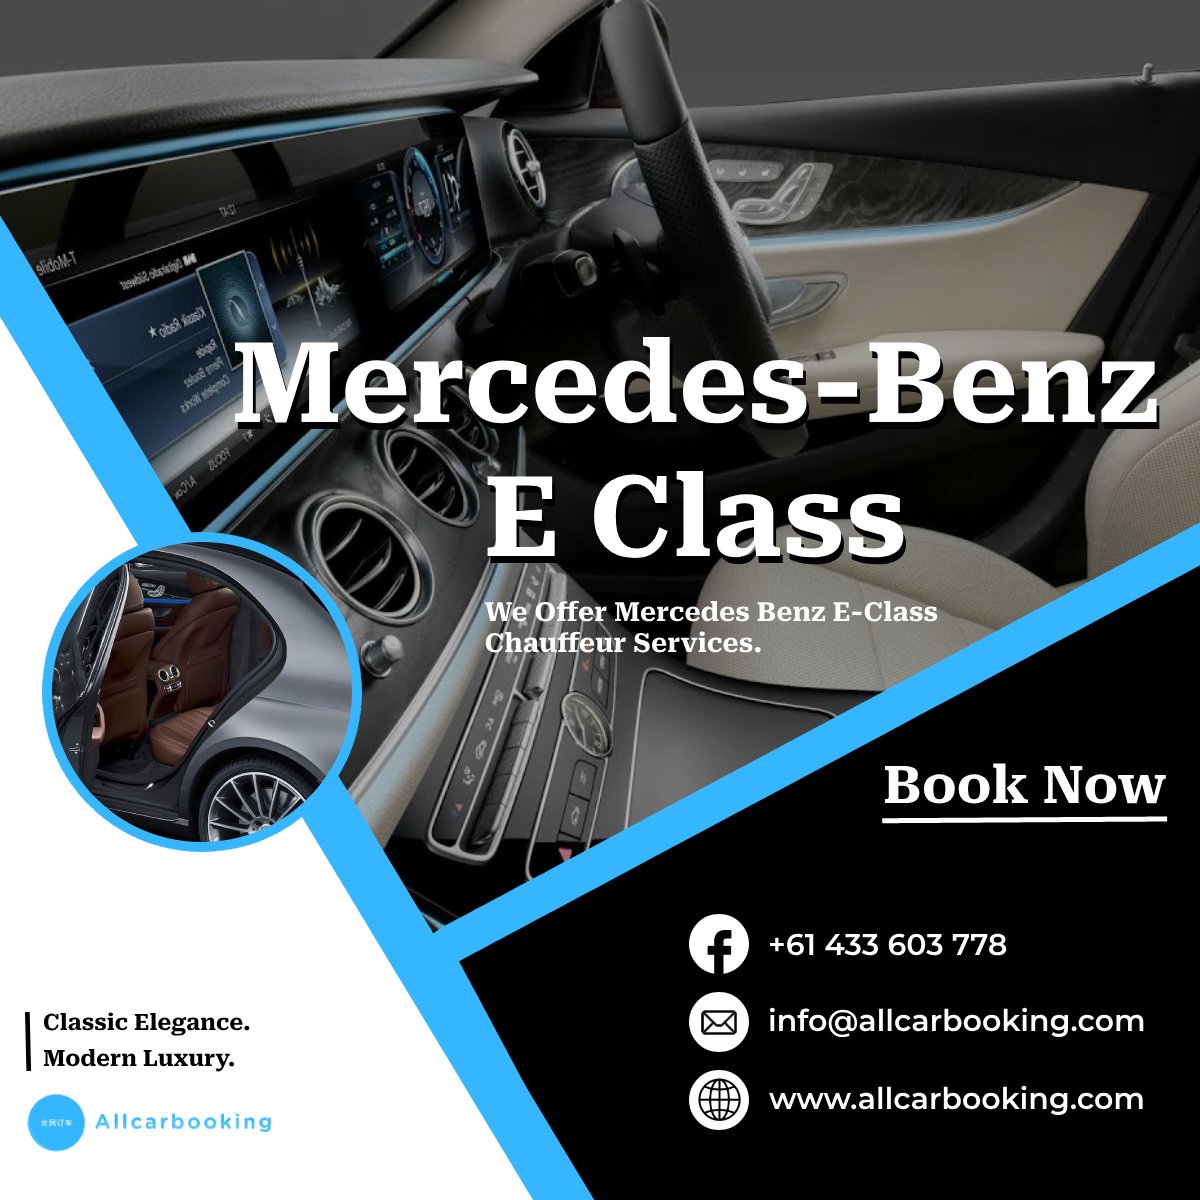 Mercedes-Benz E-Class chauffeur service is now available at Allcarbooking! #Allcarbooking #Luxury #MercedesBenzEClass #ChauffeurService #Comfort #LuxuryCar #ChauffeurDriven #ExecutiveTravel #CorporateTravel #AirportTransfer #SpecialEvents #WeddingChauffeur #NightOut #VIPTreatment